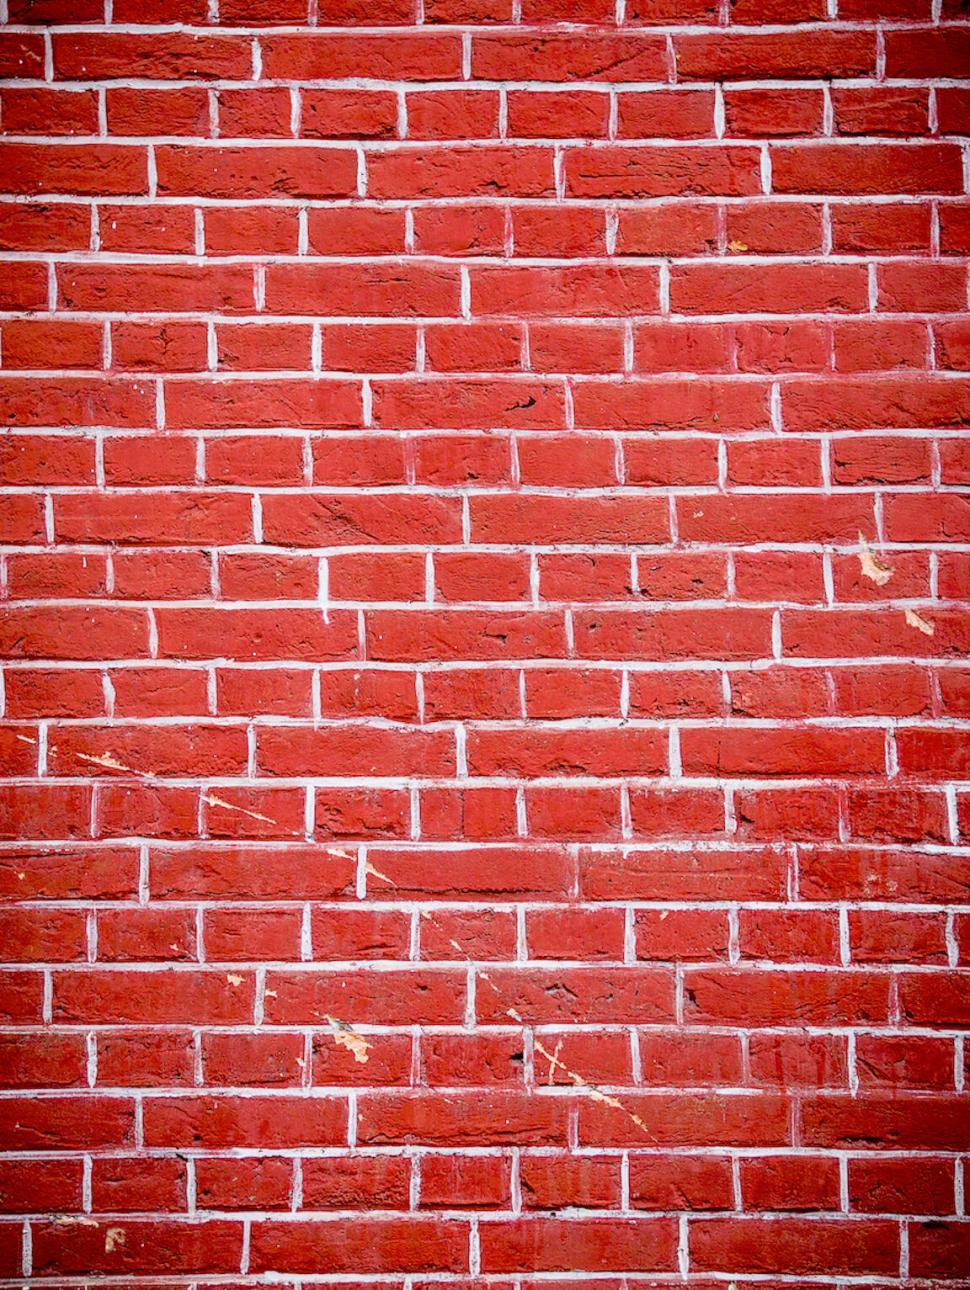 Free Image of Brick wall texture in vibrant red 